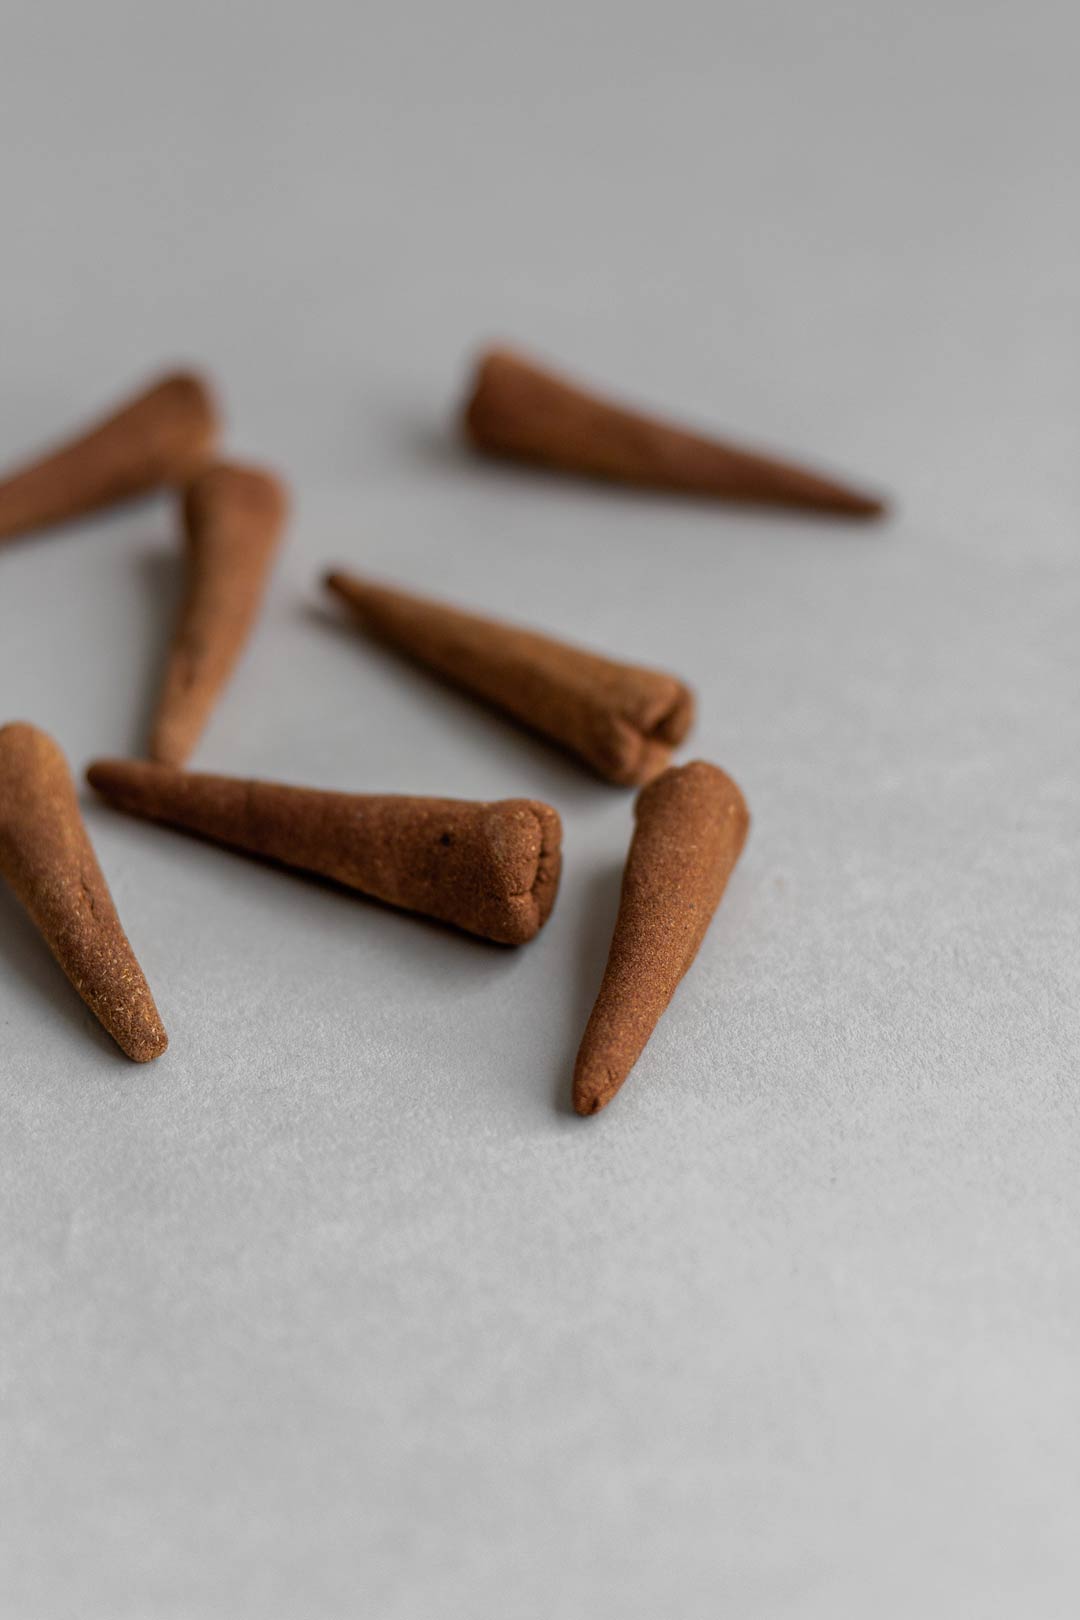 Handcrafted hana-koh cone incense made with rose petals, sandalwood and patchouli.